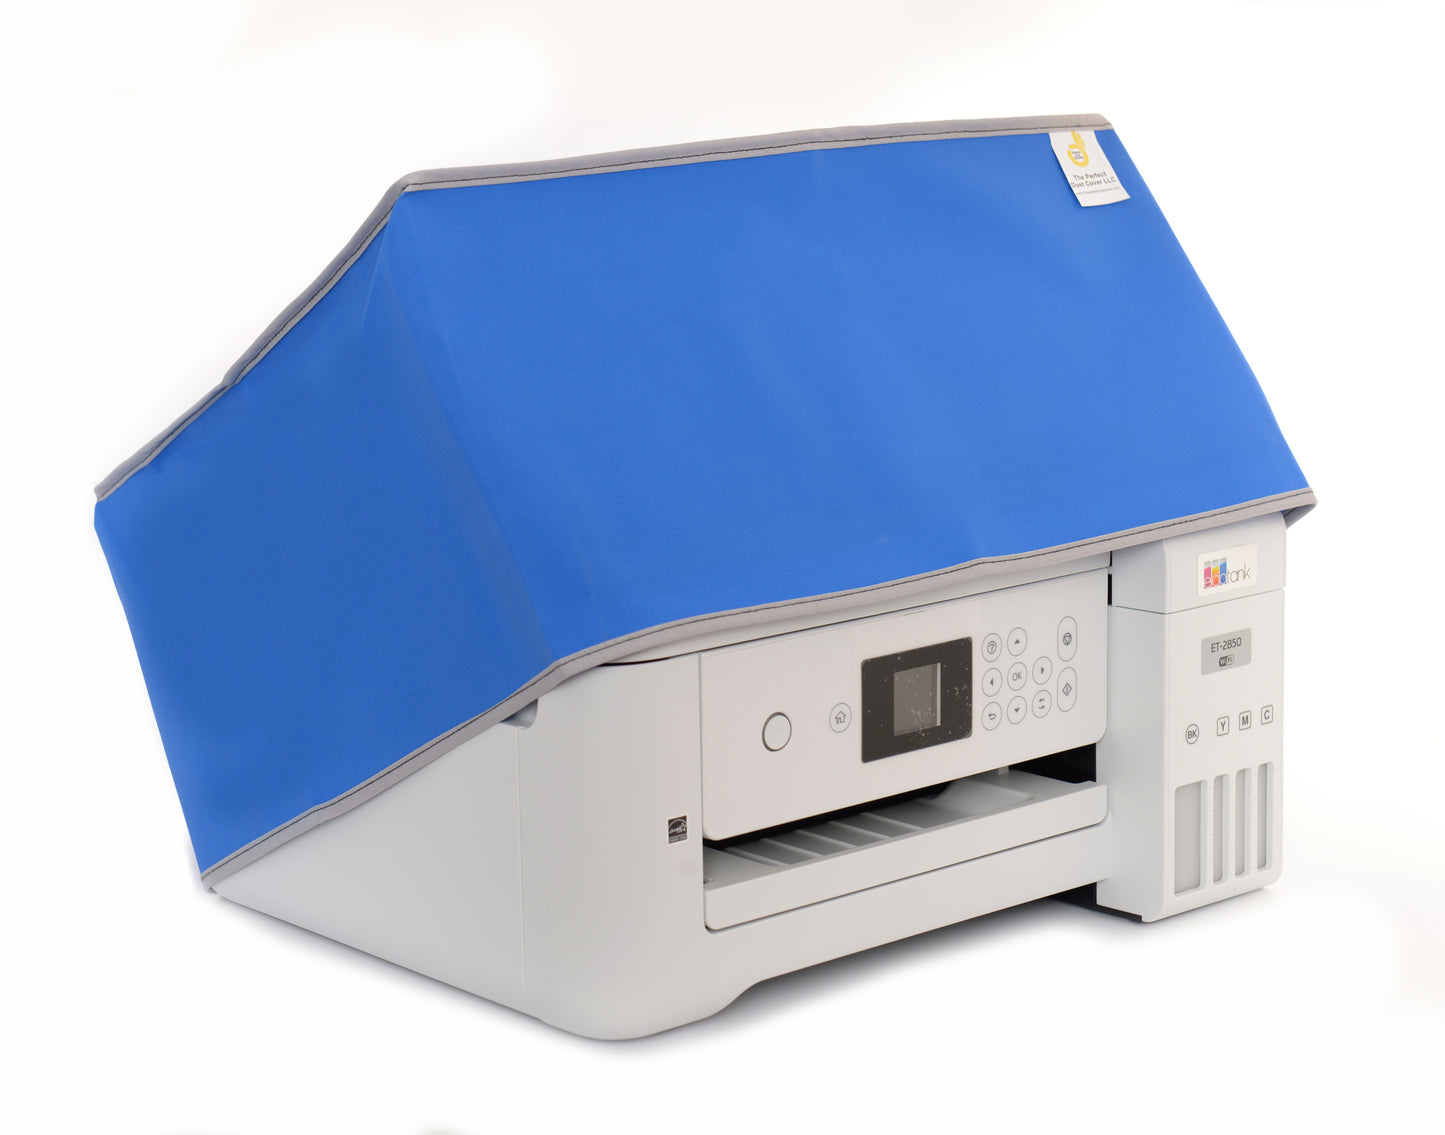 Perfect Dust Cover, Royal Blue Nylon Cover Compatible with Epson SureColor F100 and Epson SureColor F170 Dye-Sublimation Printers, Anti-Static, Double Stitched and Waterproof Dust Cover by The Perfect Dust Cover LLC